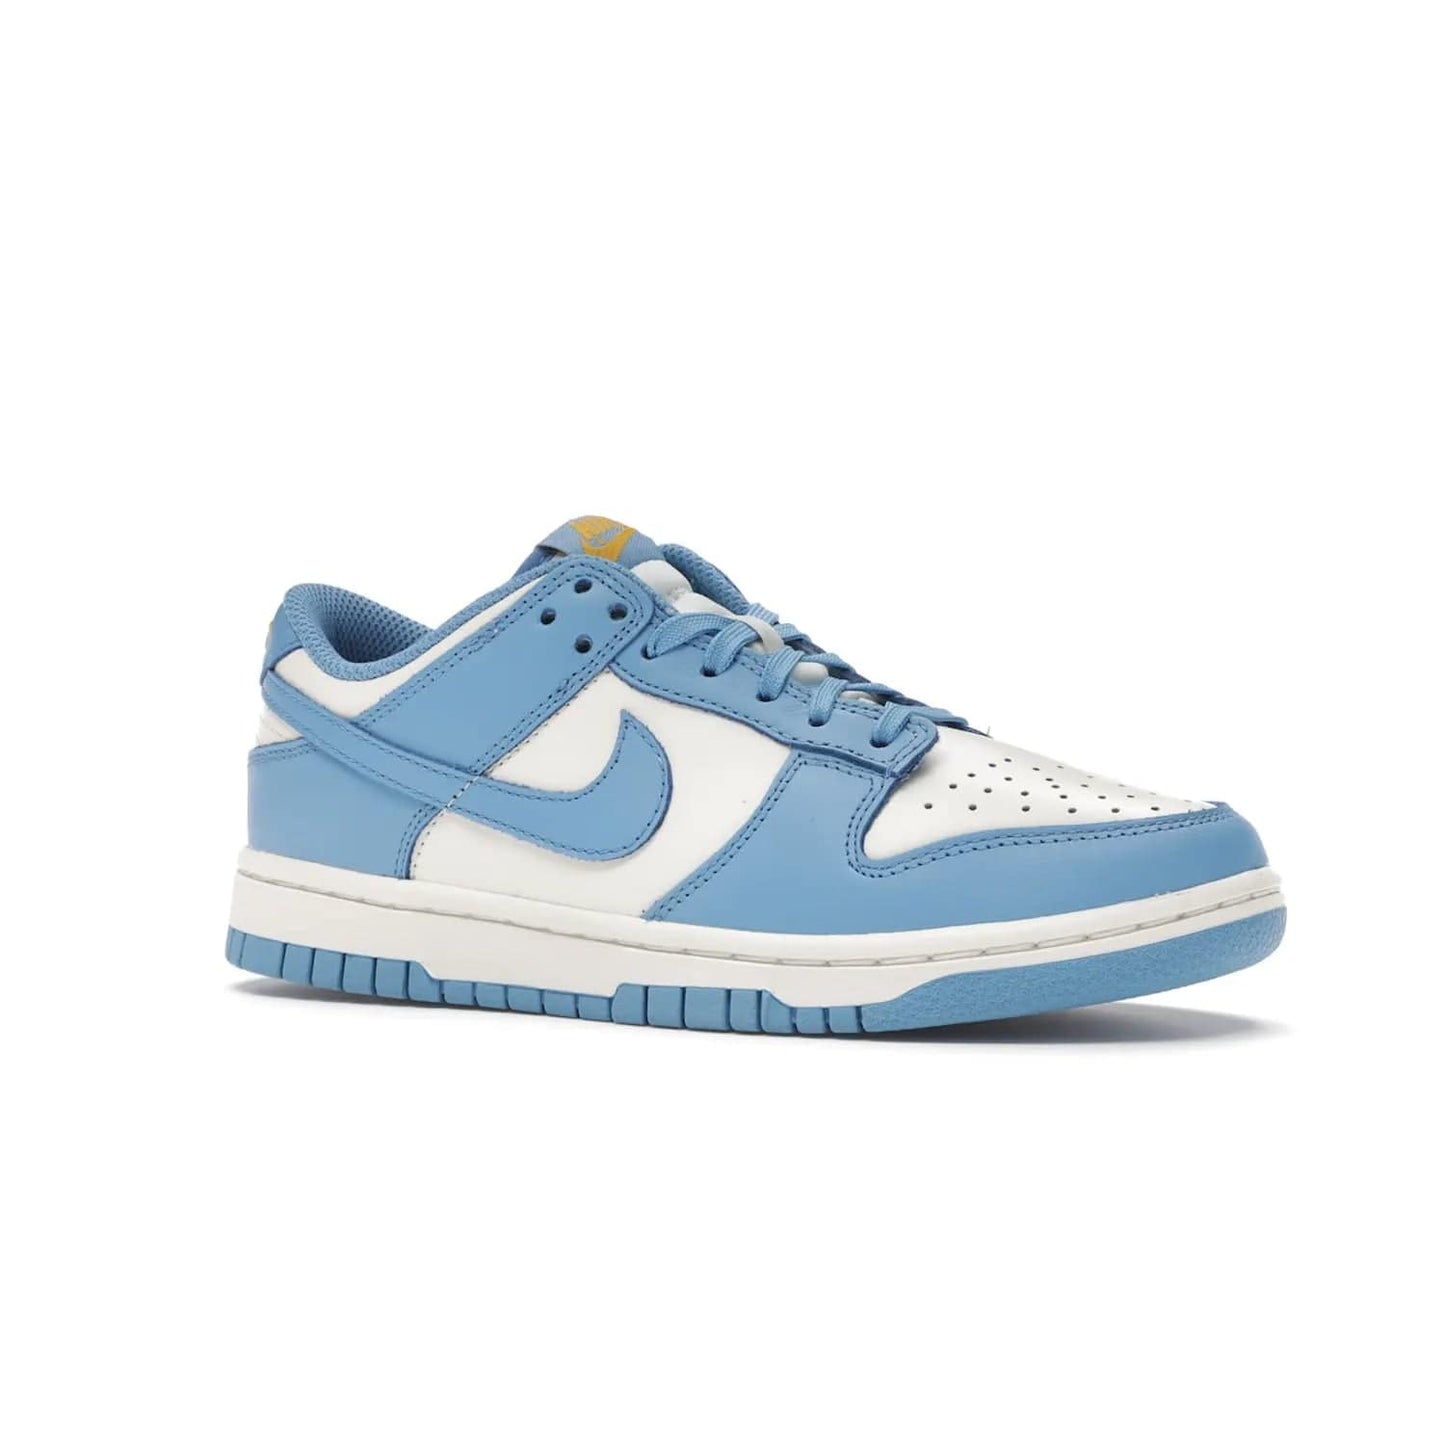 Nike Dunk Low Coast (Women's) - Image 4 - Only at www.BallersClubKickz.com - Iconic UCLA colors honor the west coast with the Nike Dunk Low Coast (Women's), a bold combo of light blue, white and yellow. Light leather upper with white midsole and light EVA outsole offer a modern twist. Released Feb 2021 for $100.